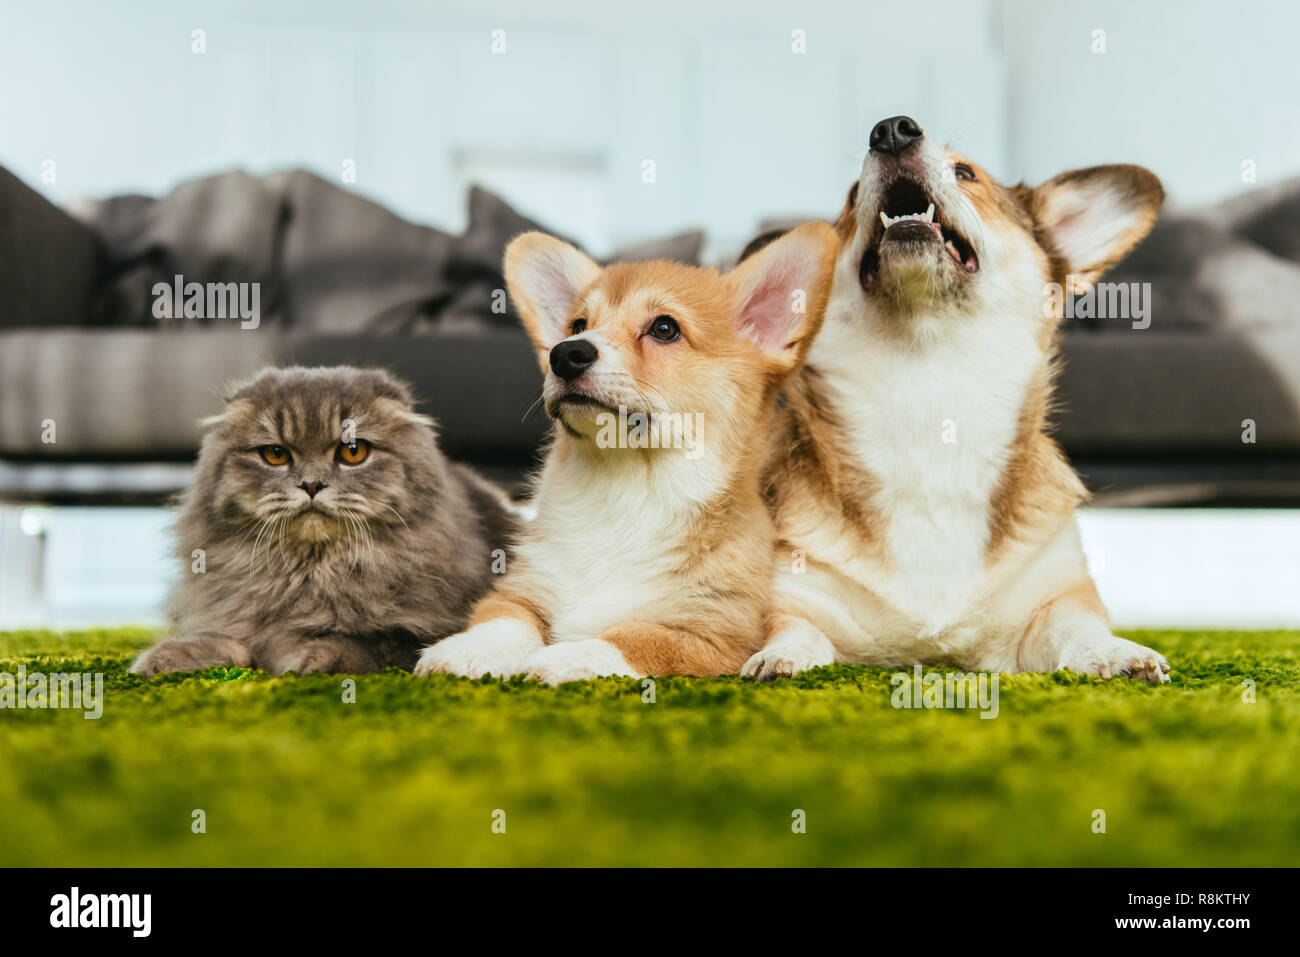 Cute Welsh Corgi Dogs And British Longhair Cat On Floor At